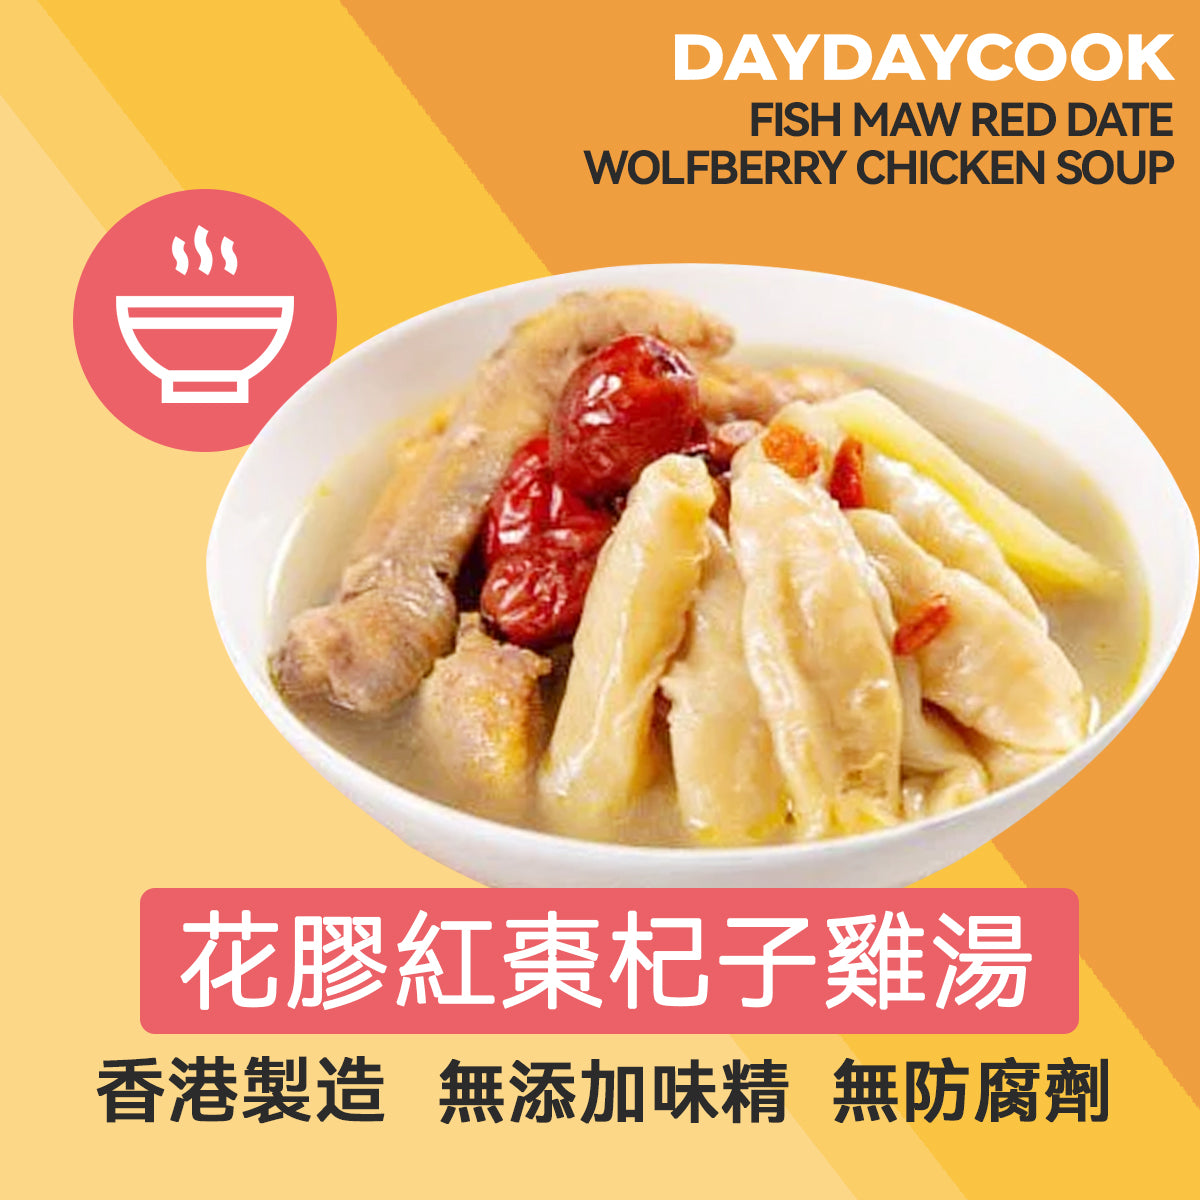 Fish Maw Red Date Wolfberry Chicken Soup